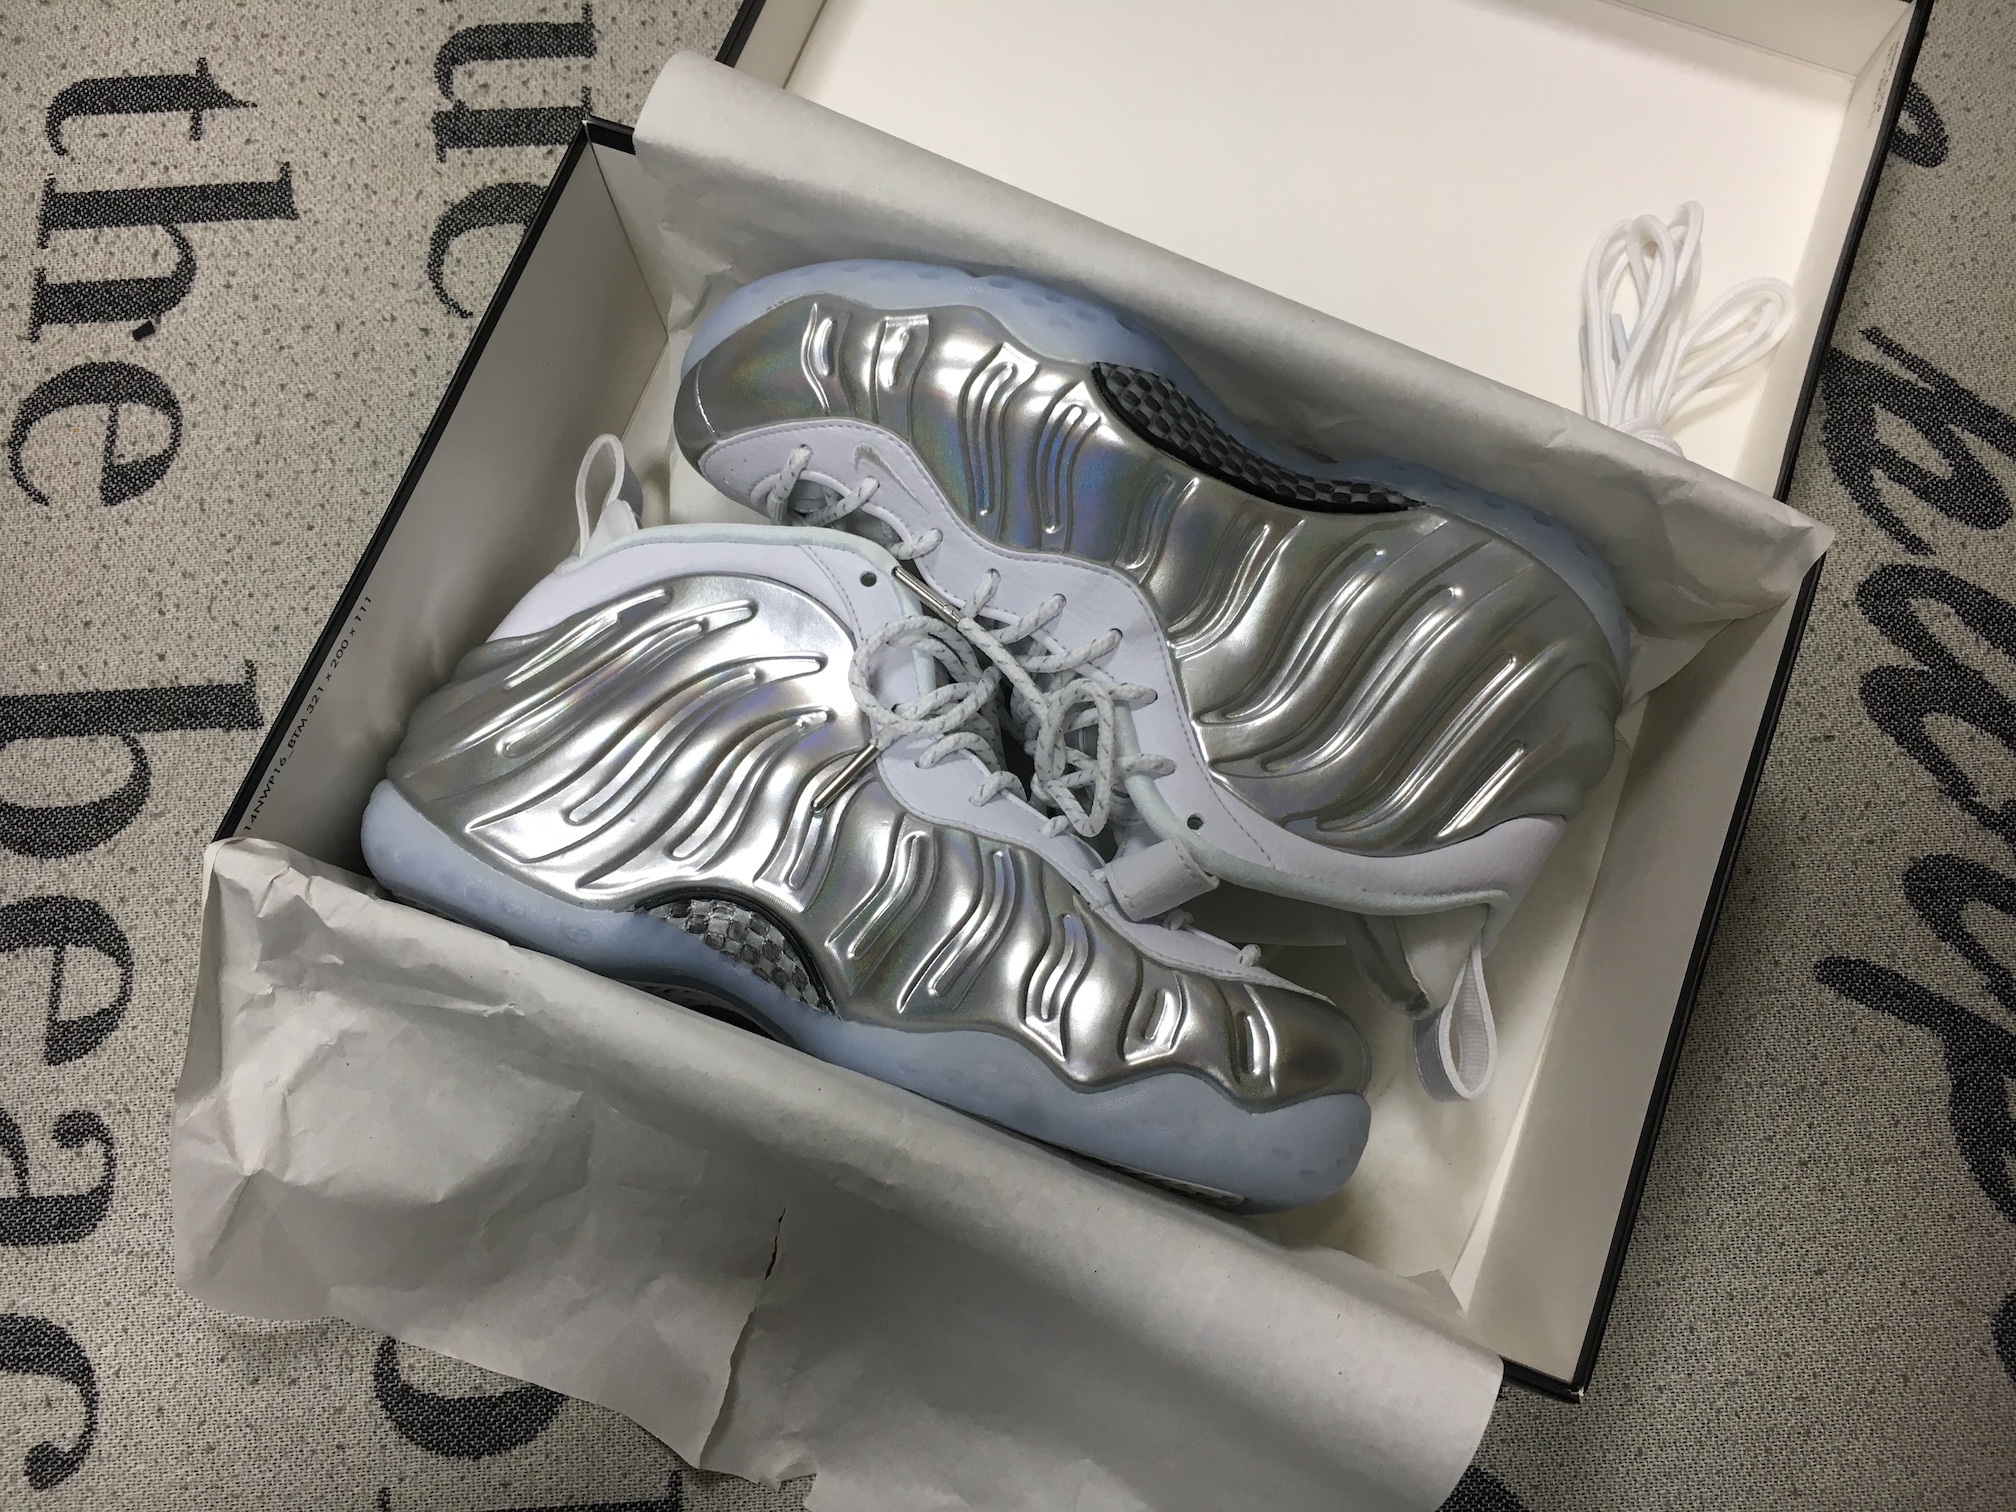 AIR FOAMPOSITE ONE CHROME エア フォームポジット ワン クローム